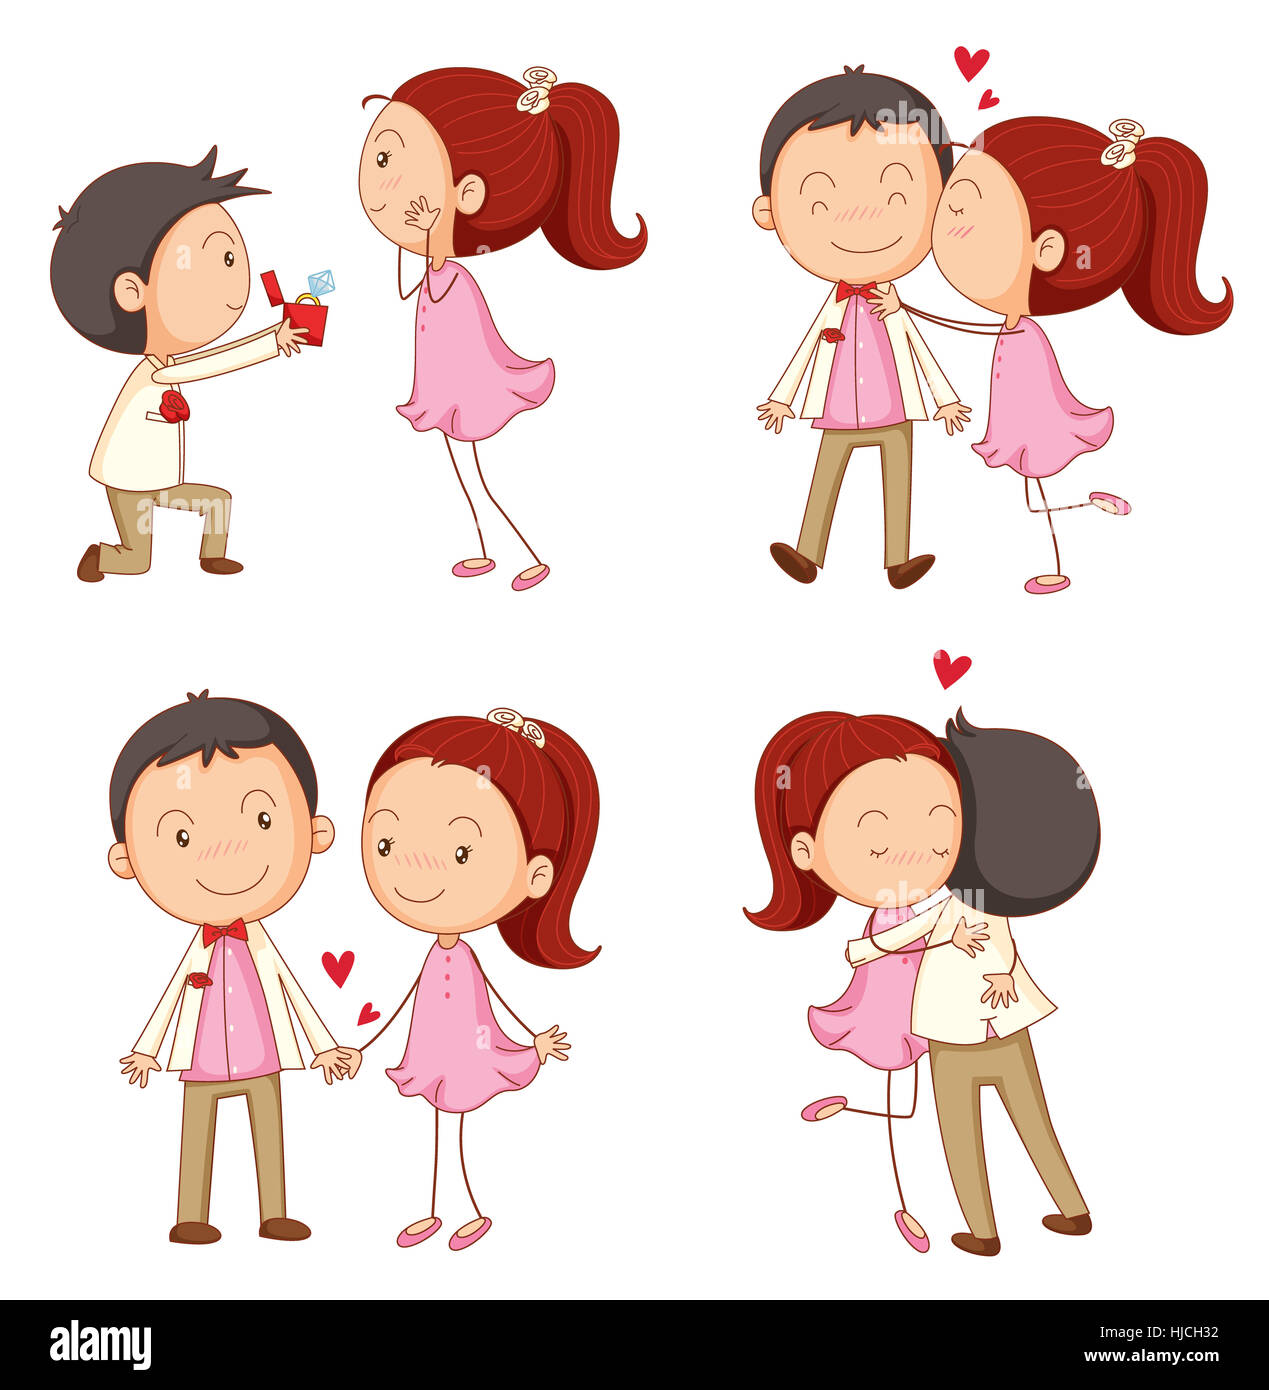 Boy proposing girl Cut Out Stock Images & Pictures - Alamy